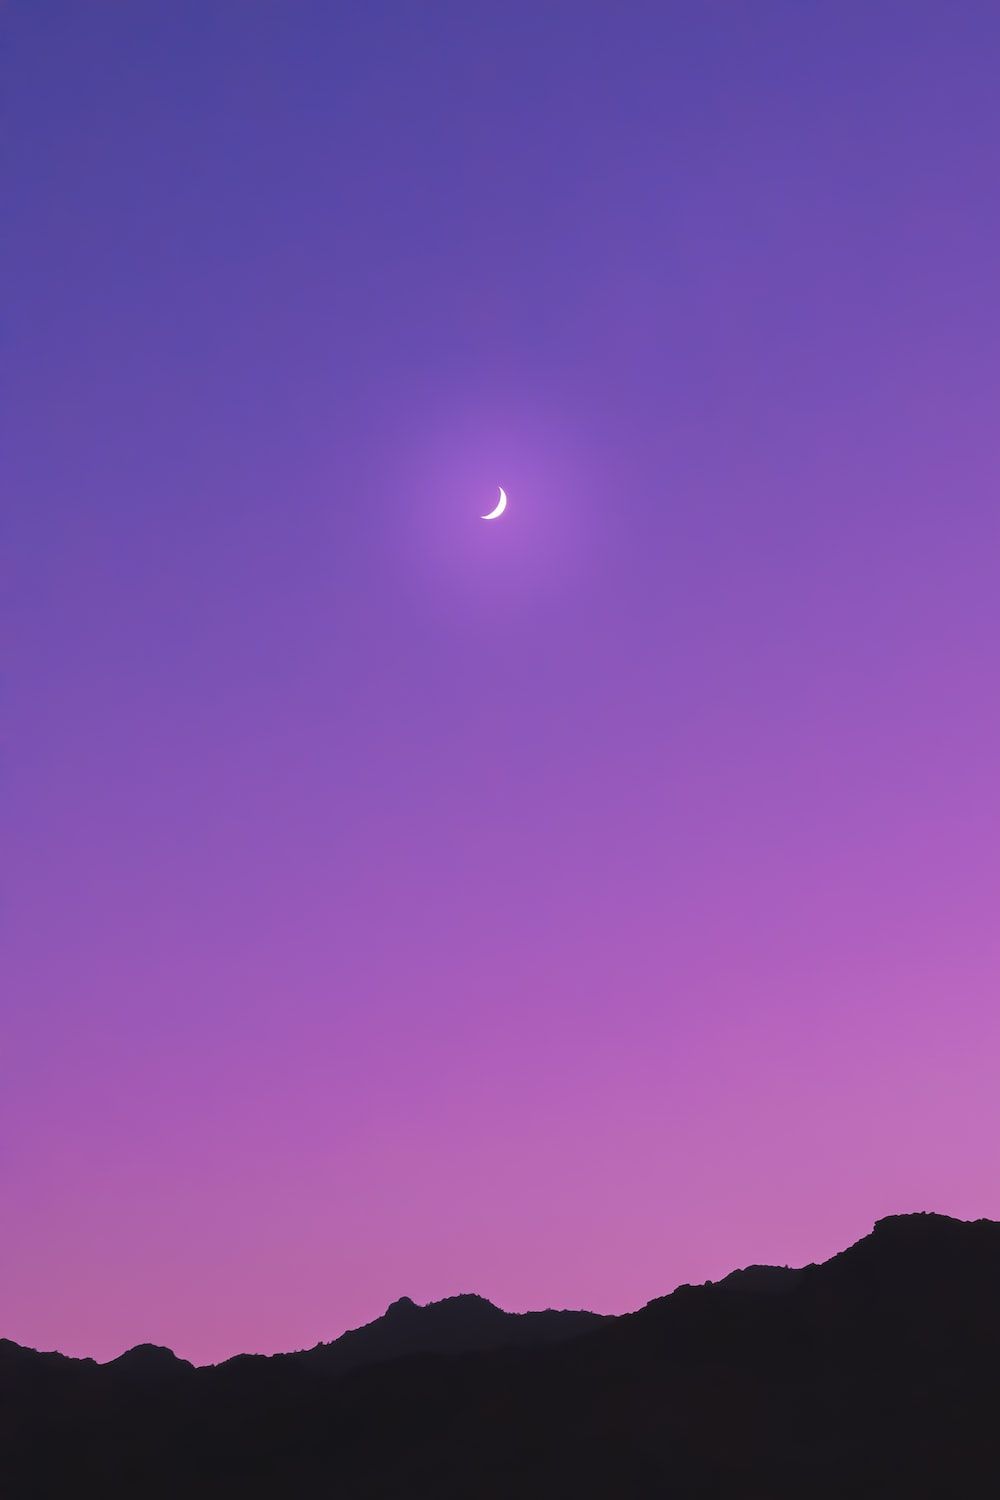 A crescent moon in a purple sky above a mountain range - Night